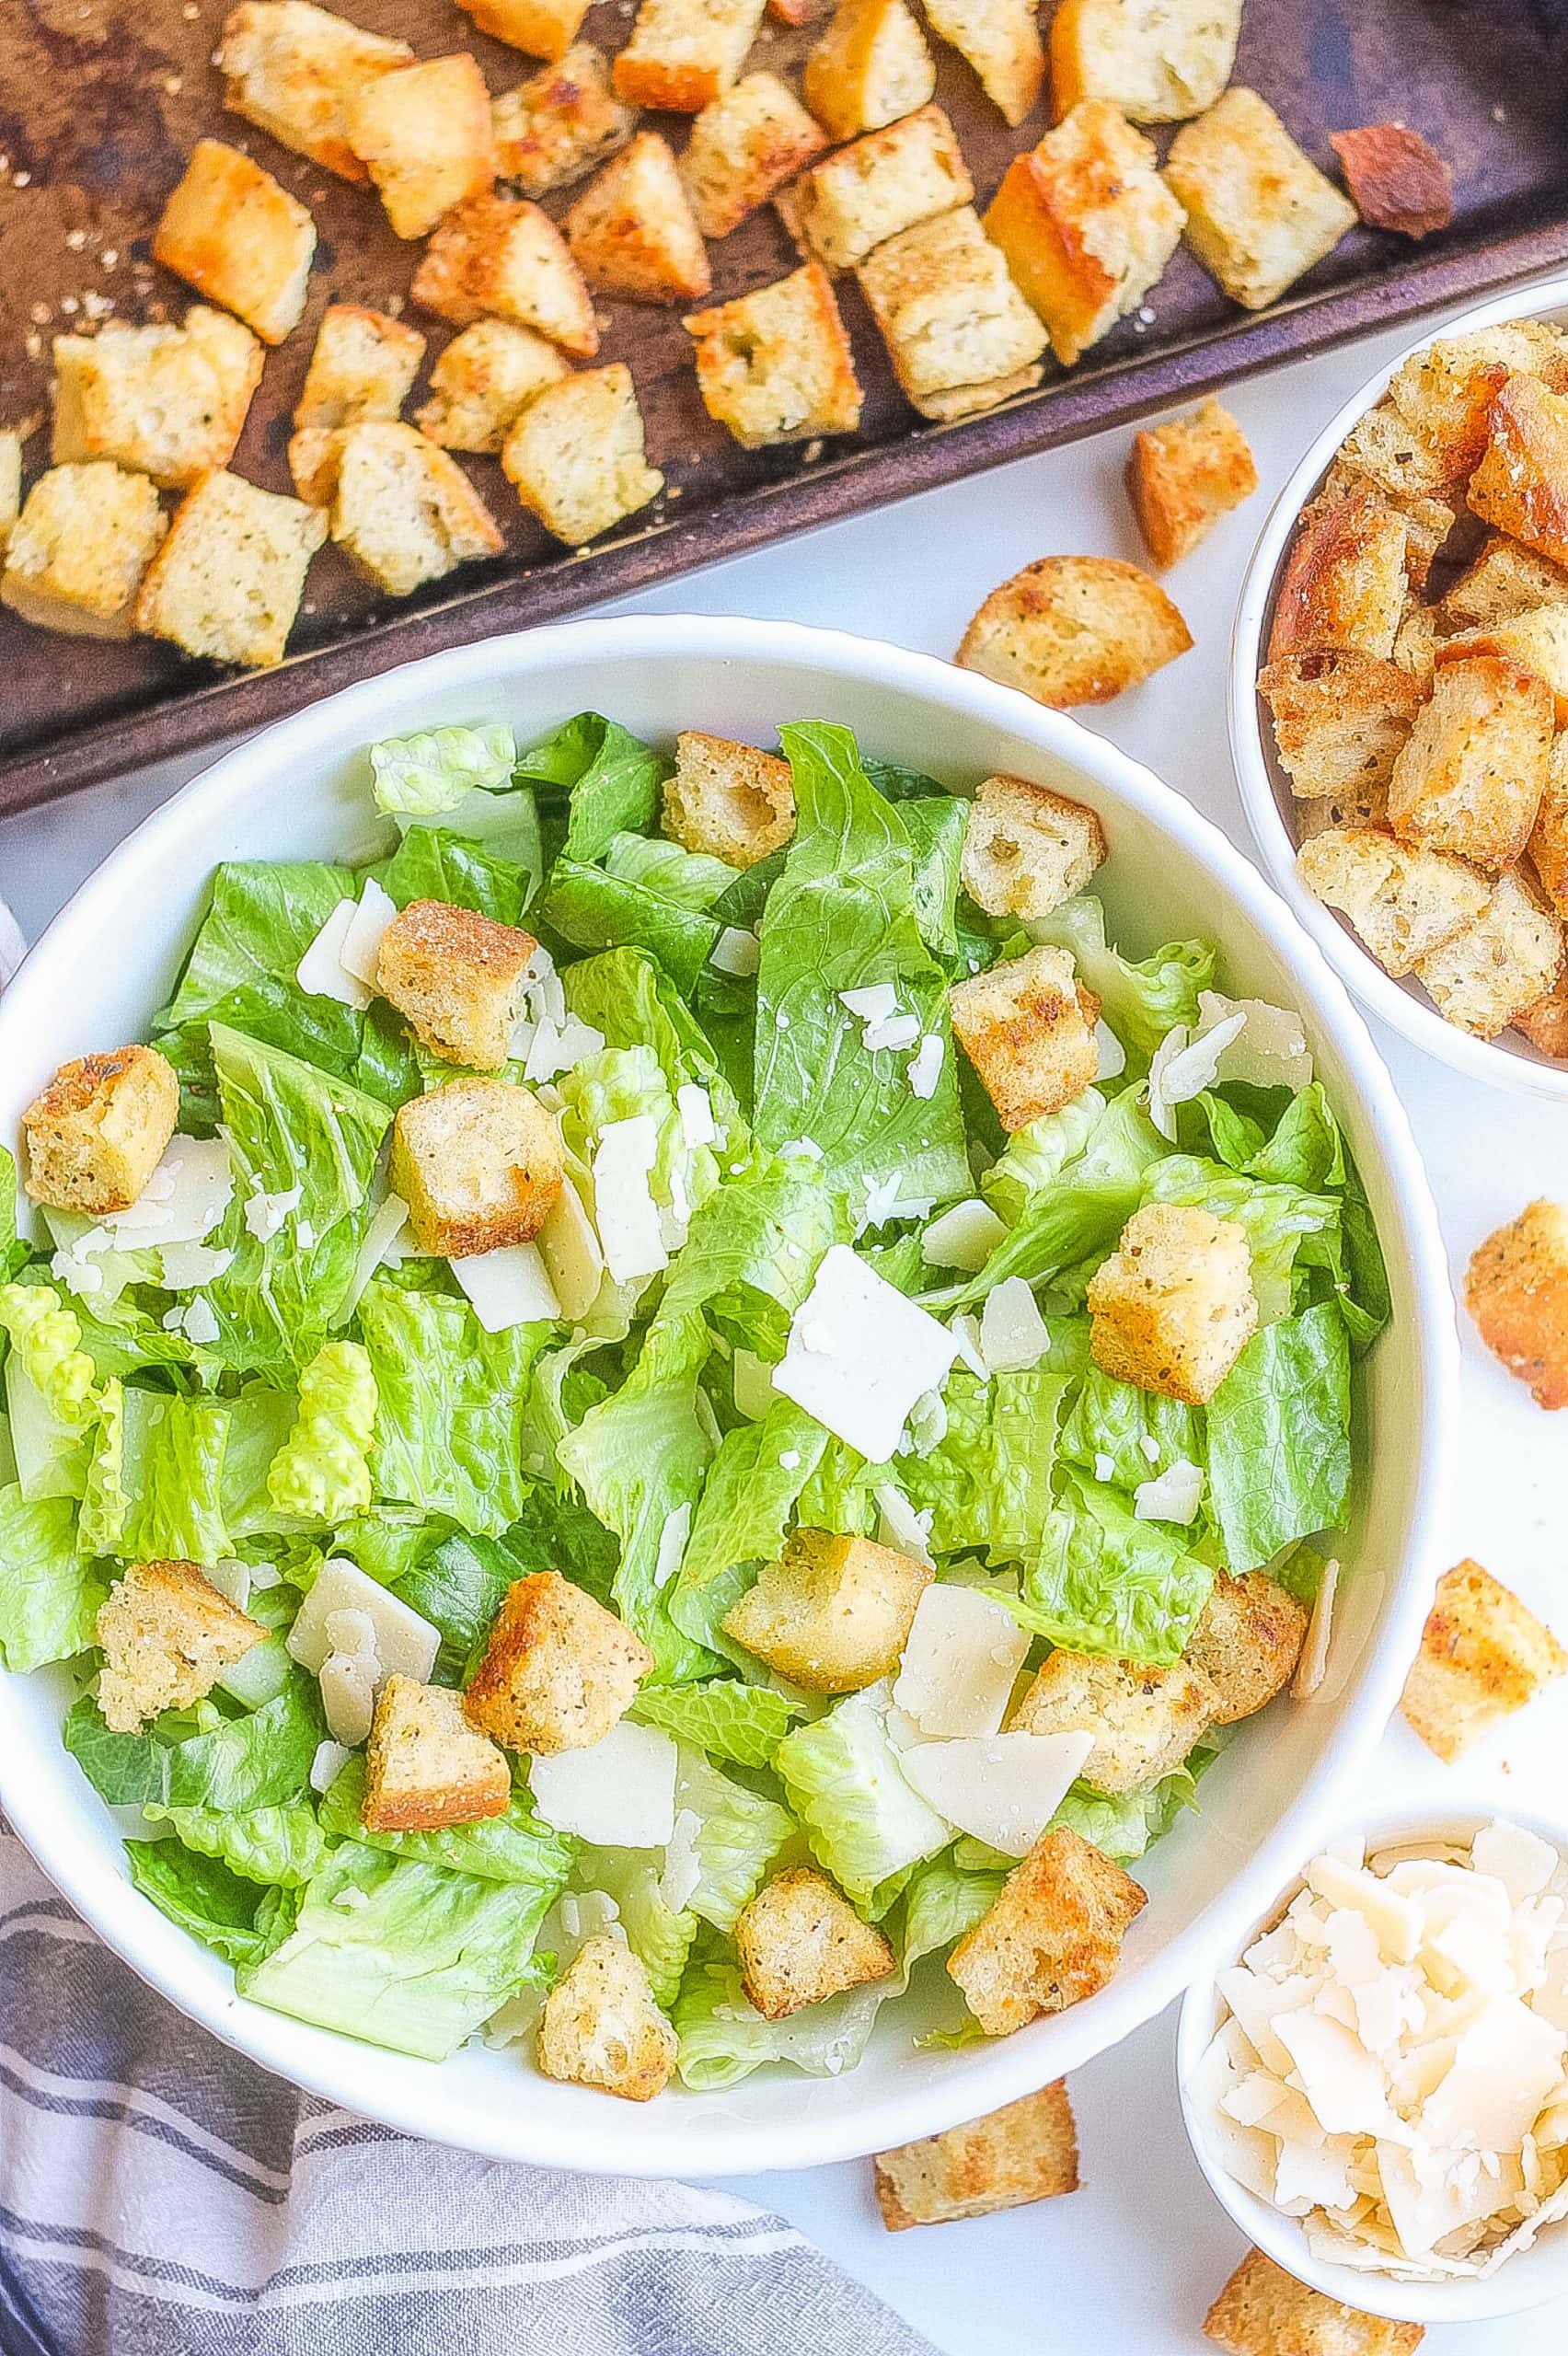 top view of homemade croutons recipe on bed of greens with parmesan